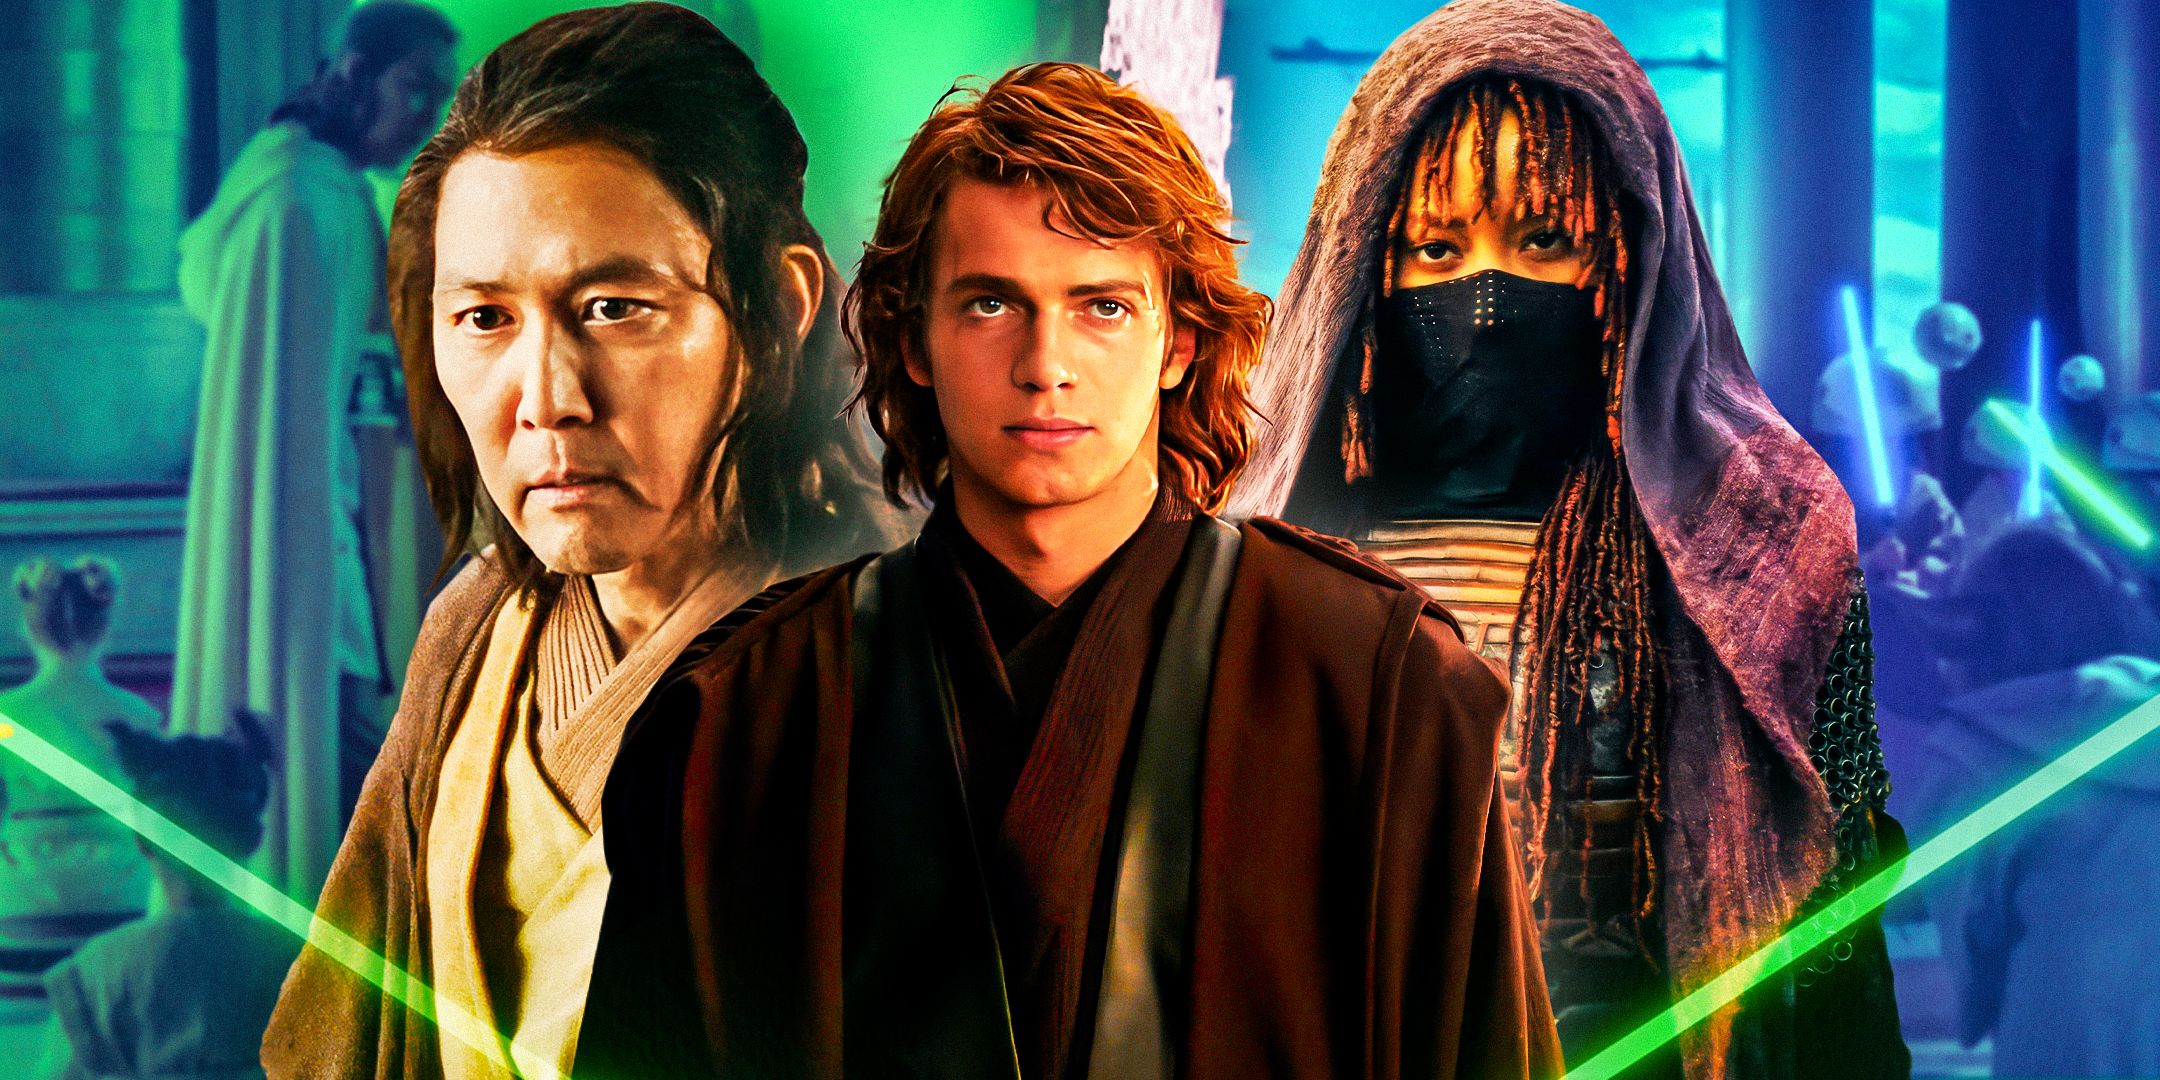 Amandla-Stenberg-as-Mae-Osha-and-Lee-Jung-jae-as-Master-Sol-from-The-Acolyte-and-Hayden-Christensen-as-Anakin-Skywalker-from-Star-Wars-Episode-III---Revenge-of-the-Sith